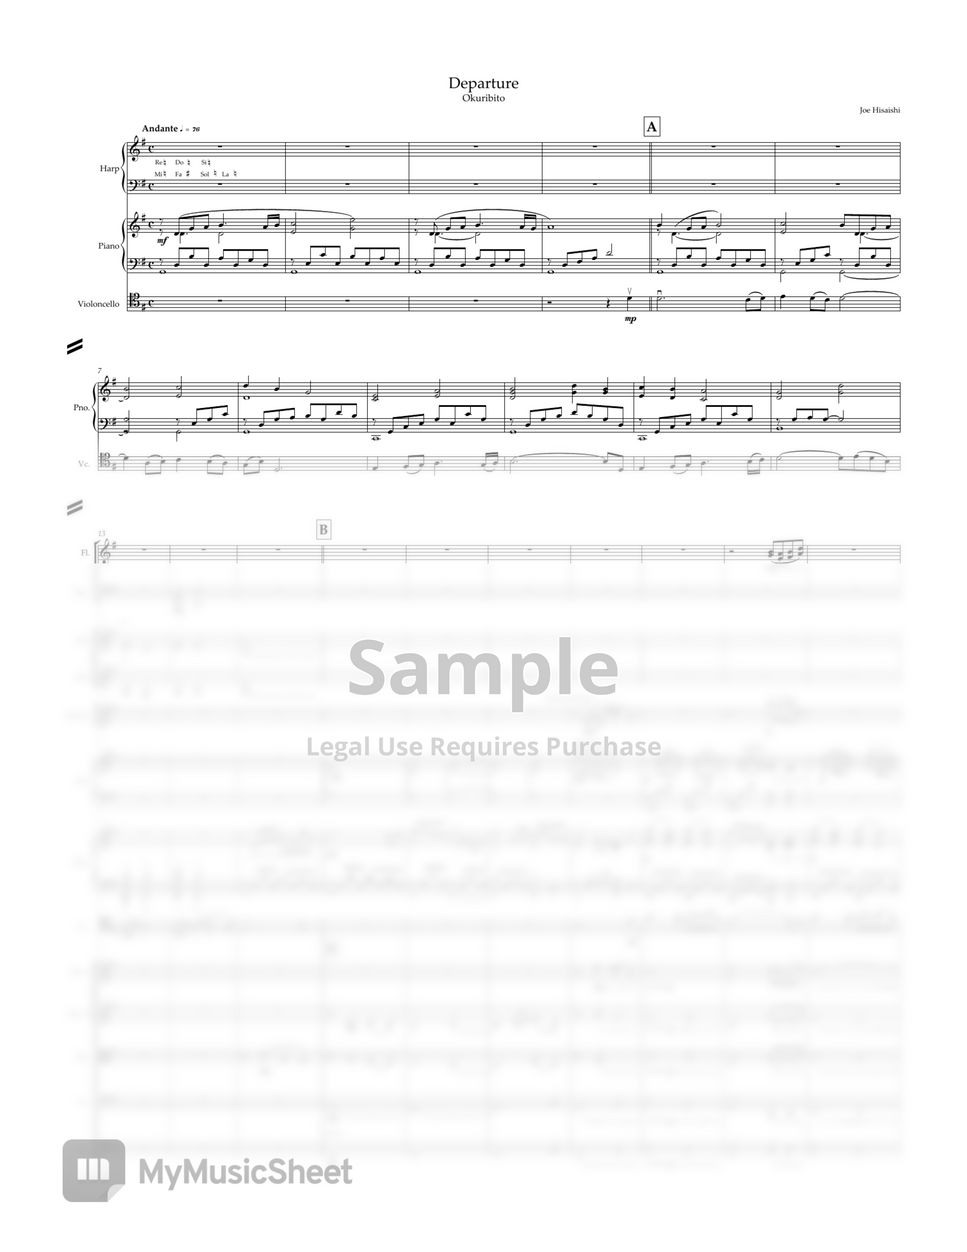 Joe Hisaishi - Departure - Melodyphony for Cello and Orchestra - Score and Part by Hai Mai